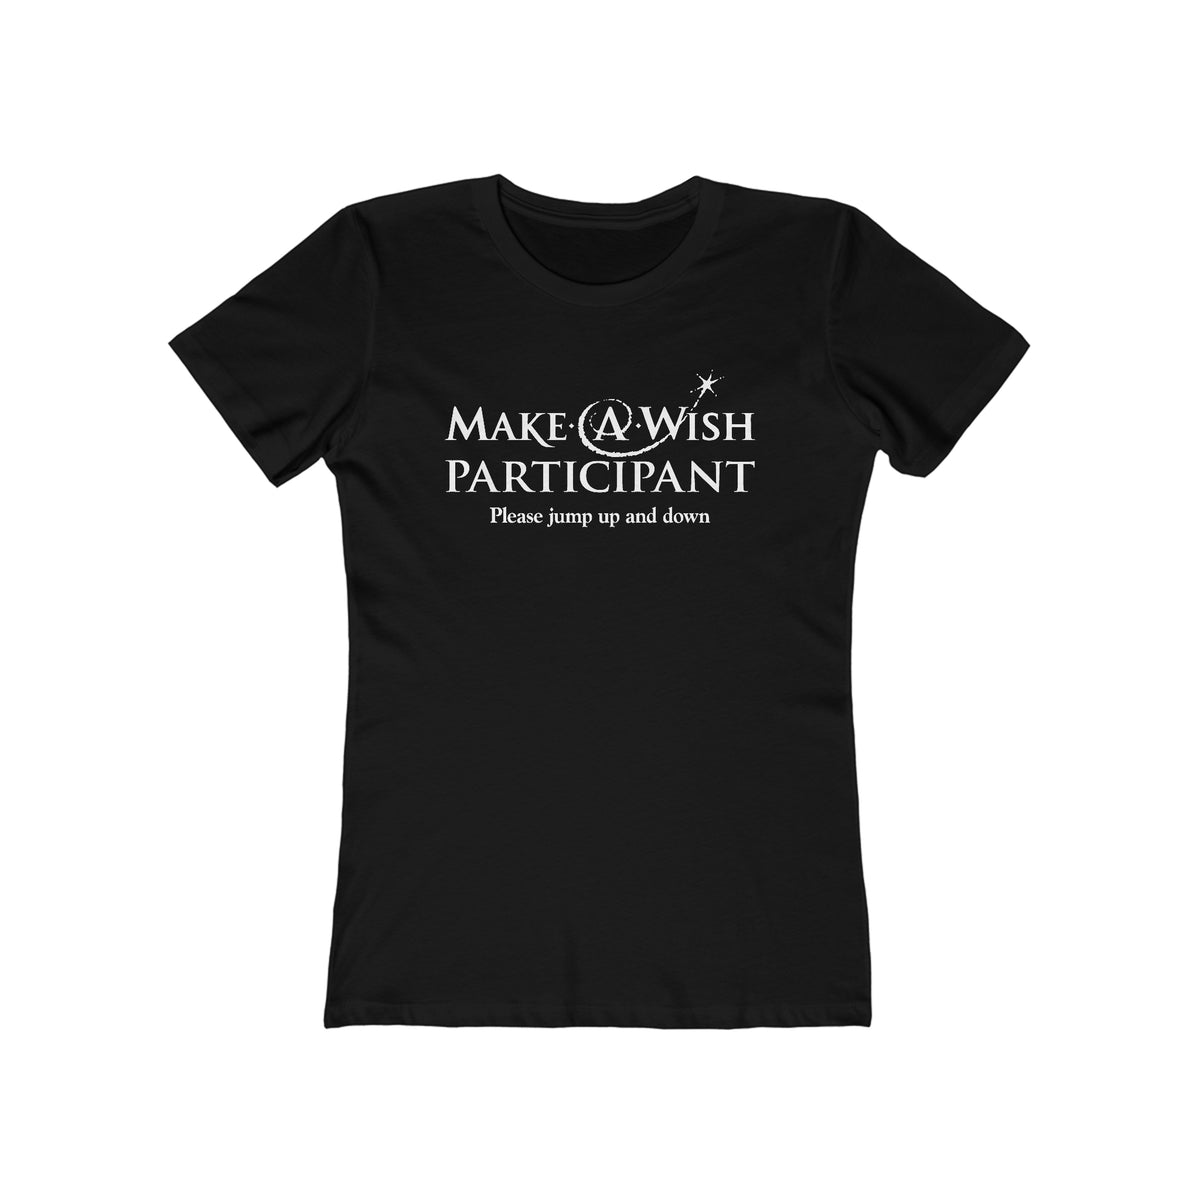 Make A Wish Participant Please Jump Up And Down - Women’s T-Shirt